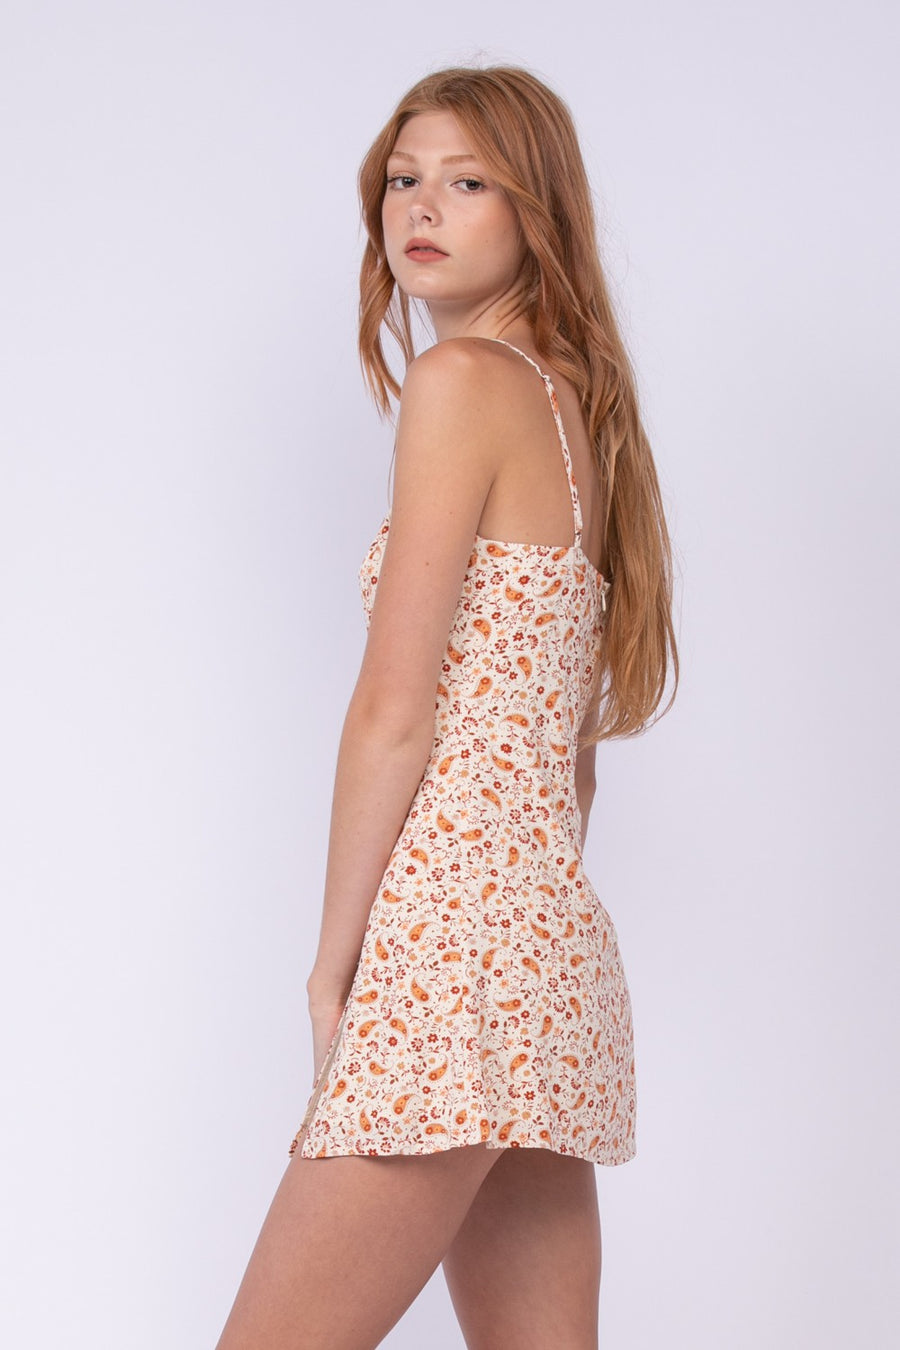 Model is wearing a floral print mini dress with side slit.